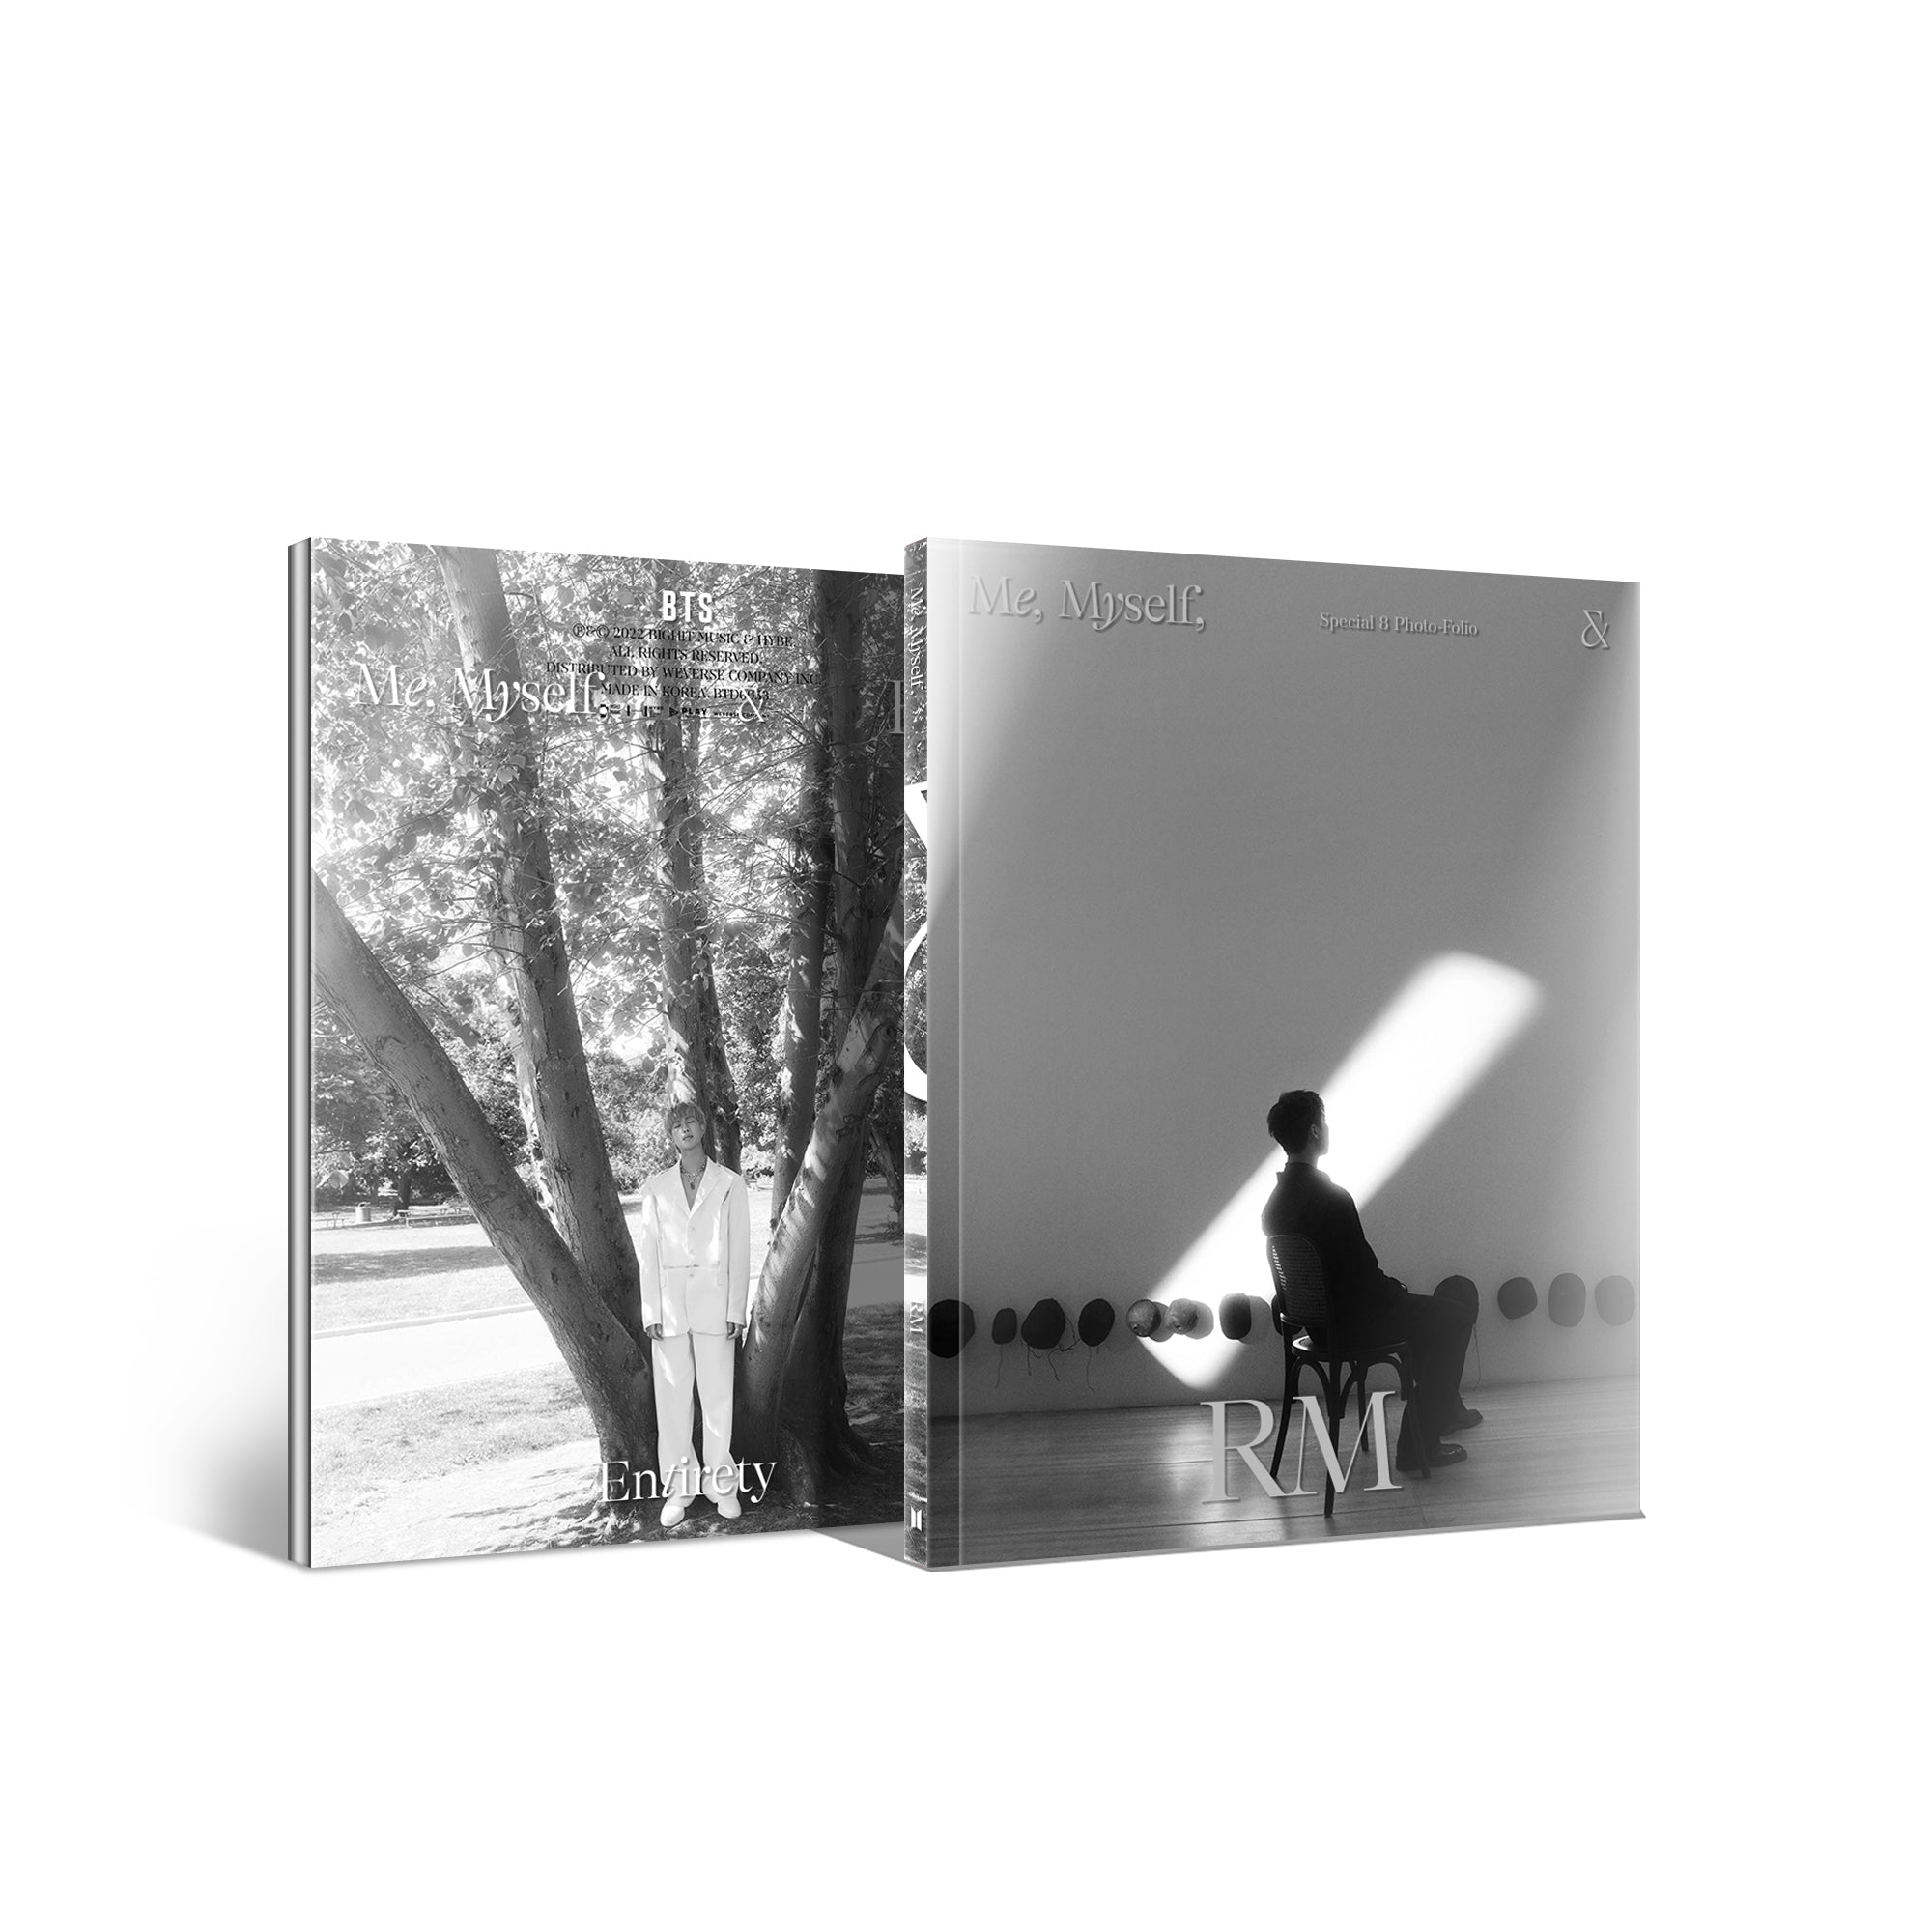 RM (BTS) - Special 8 Photo-Folio Me, Myself, and RM 'Entirety'